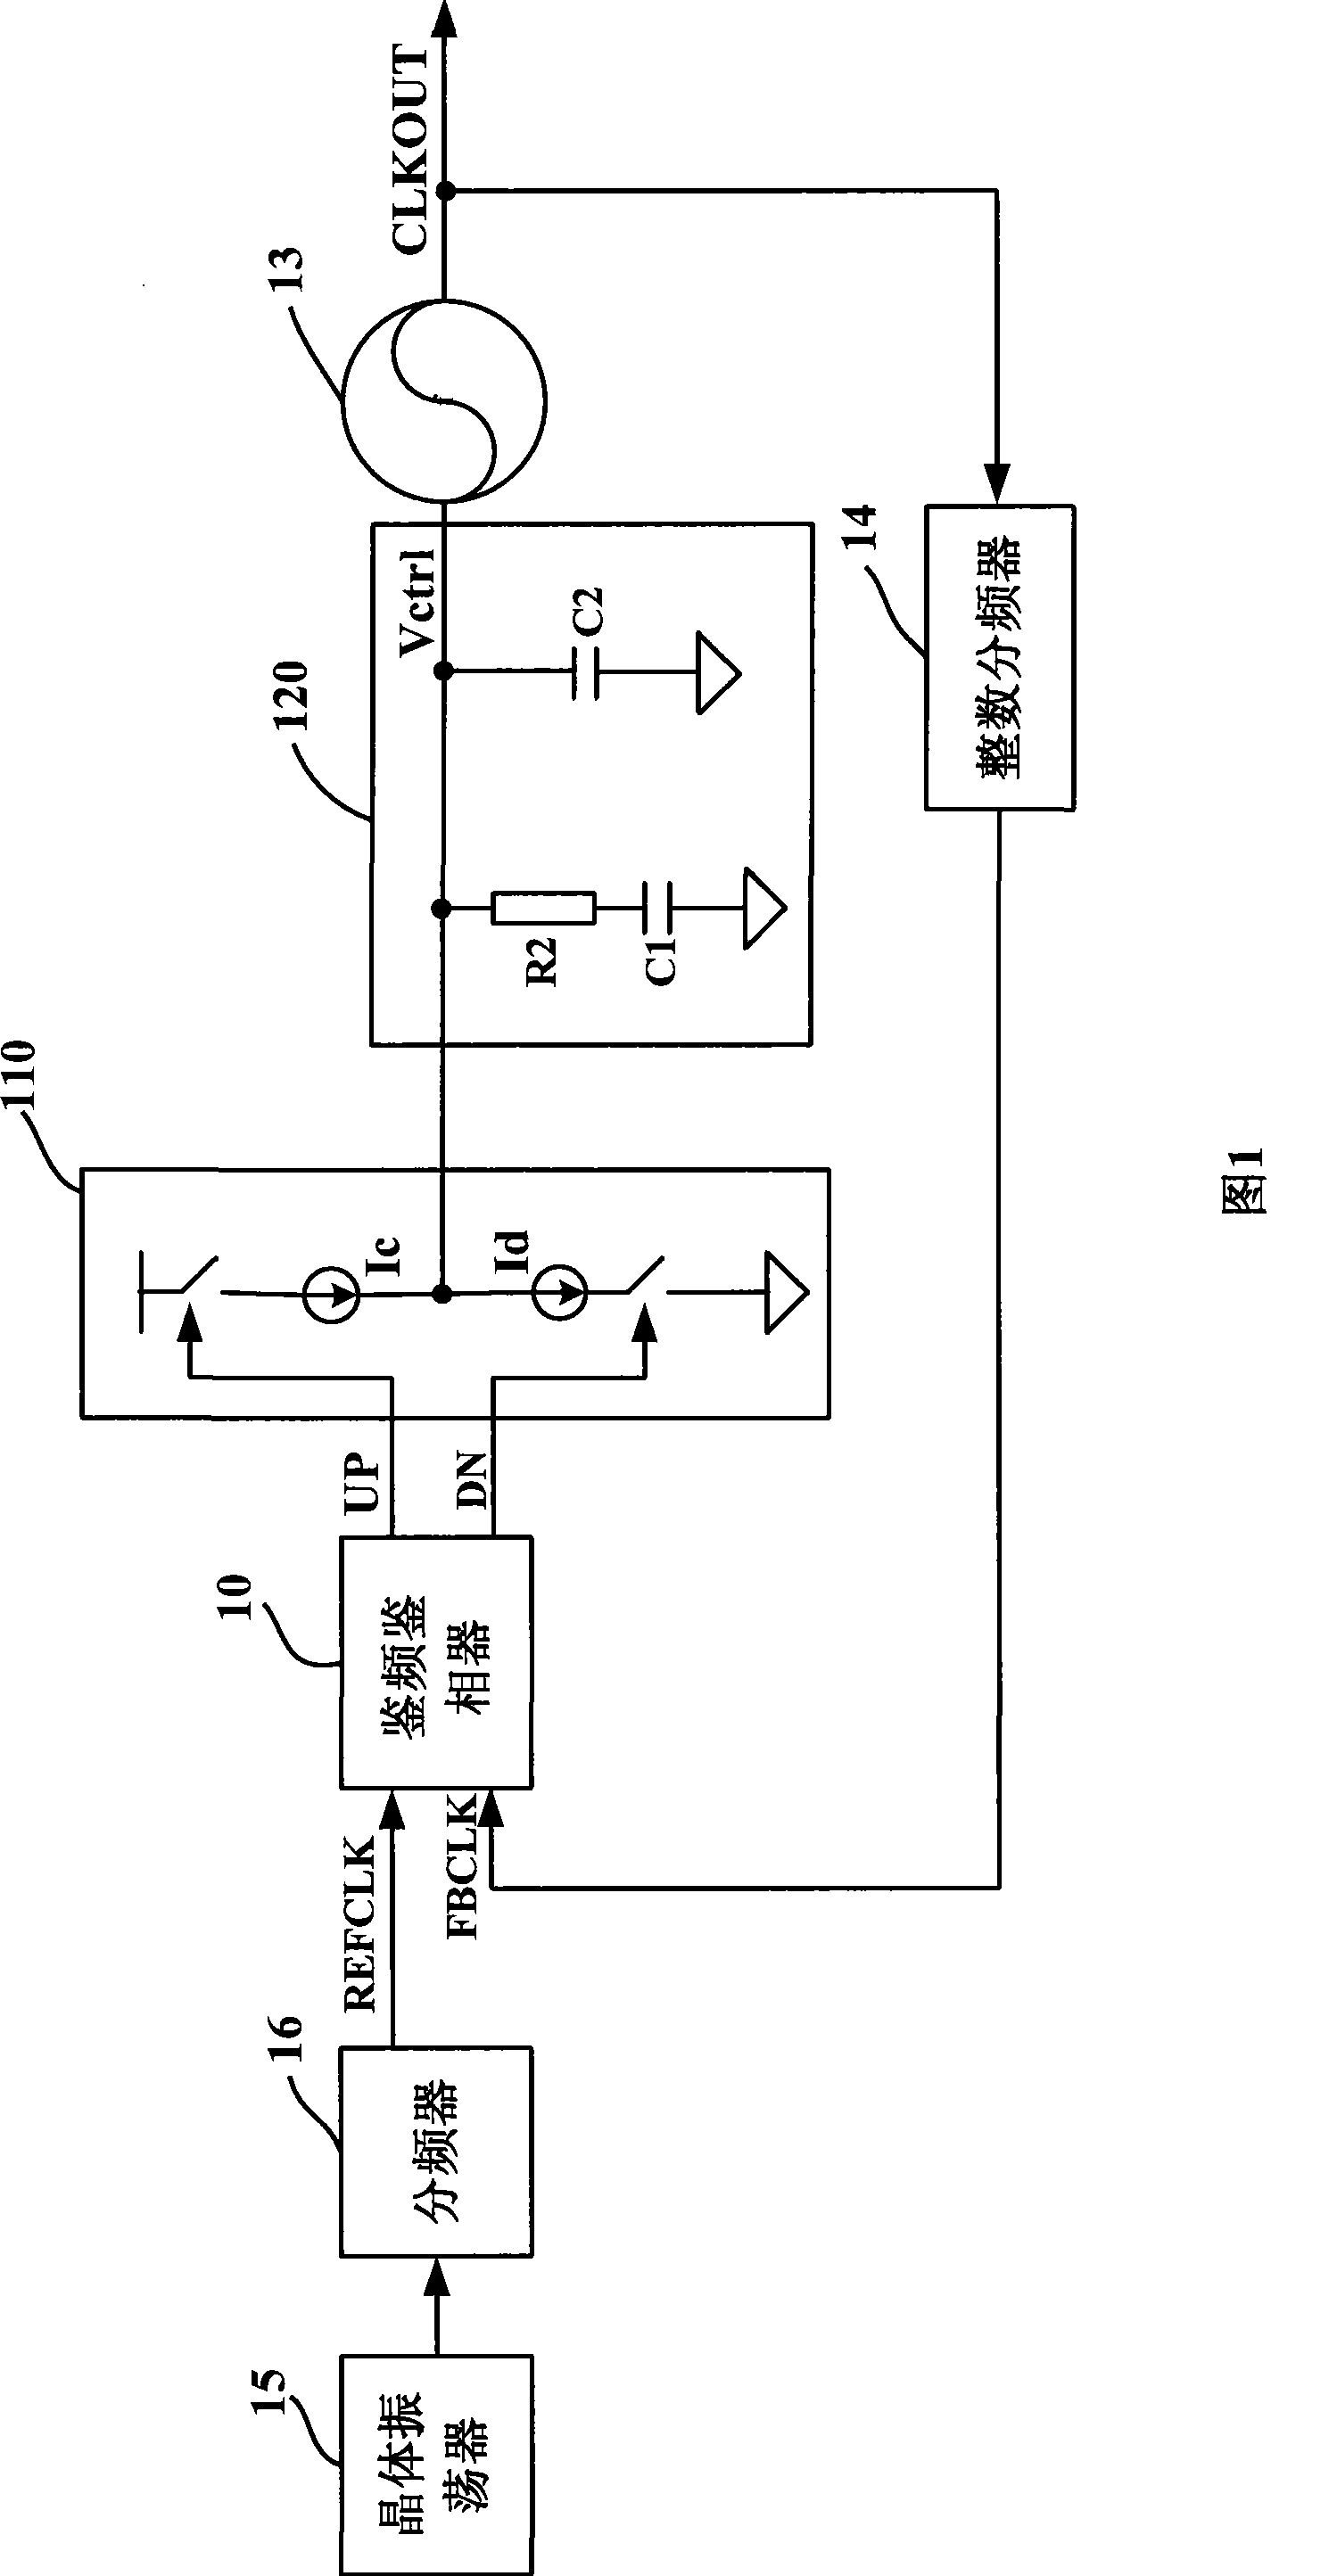 Rapidly-locked frequency generator